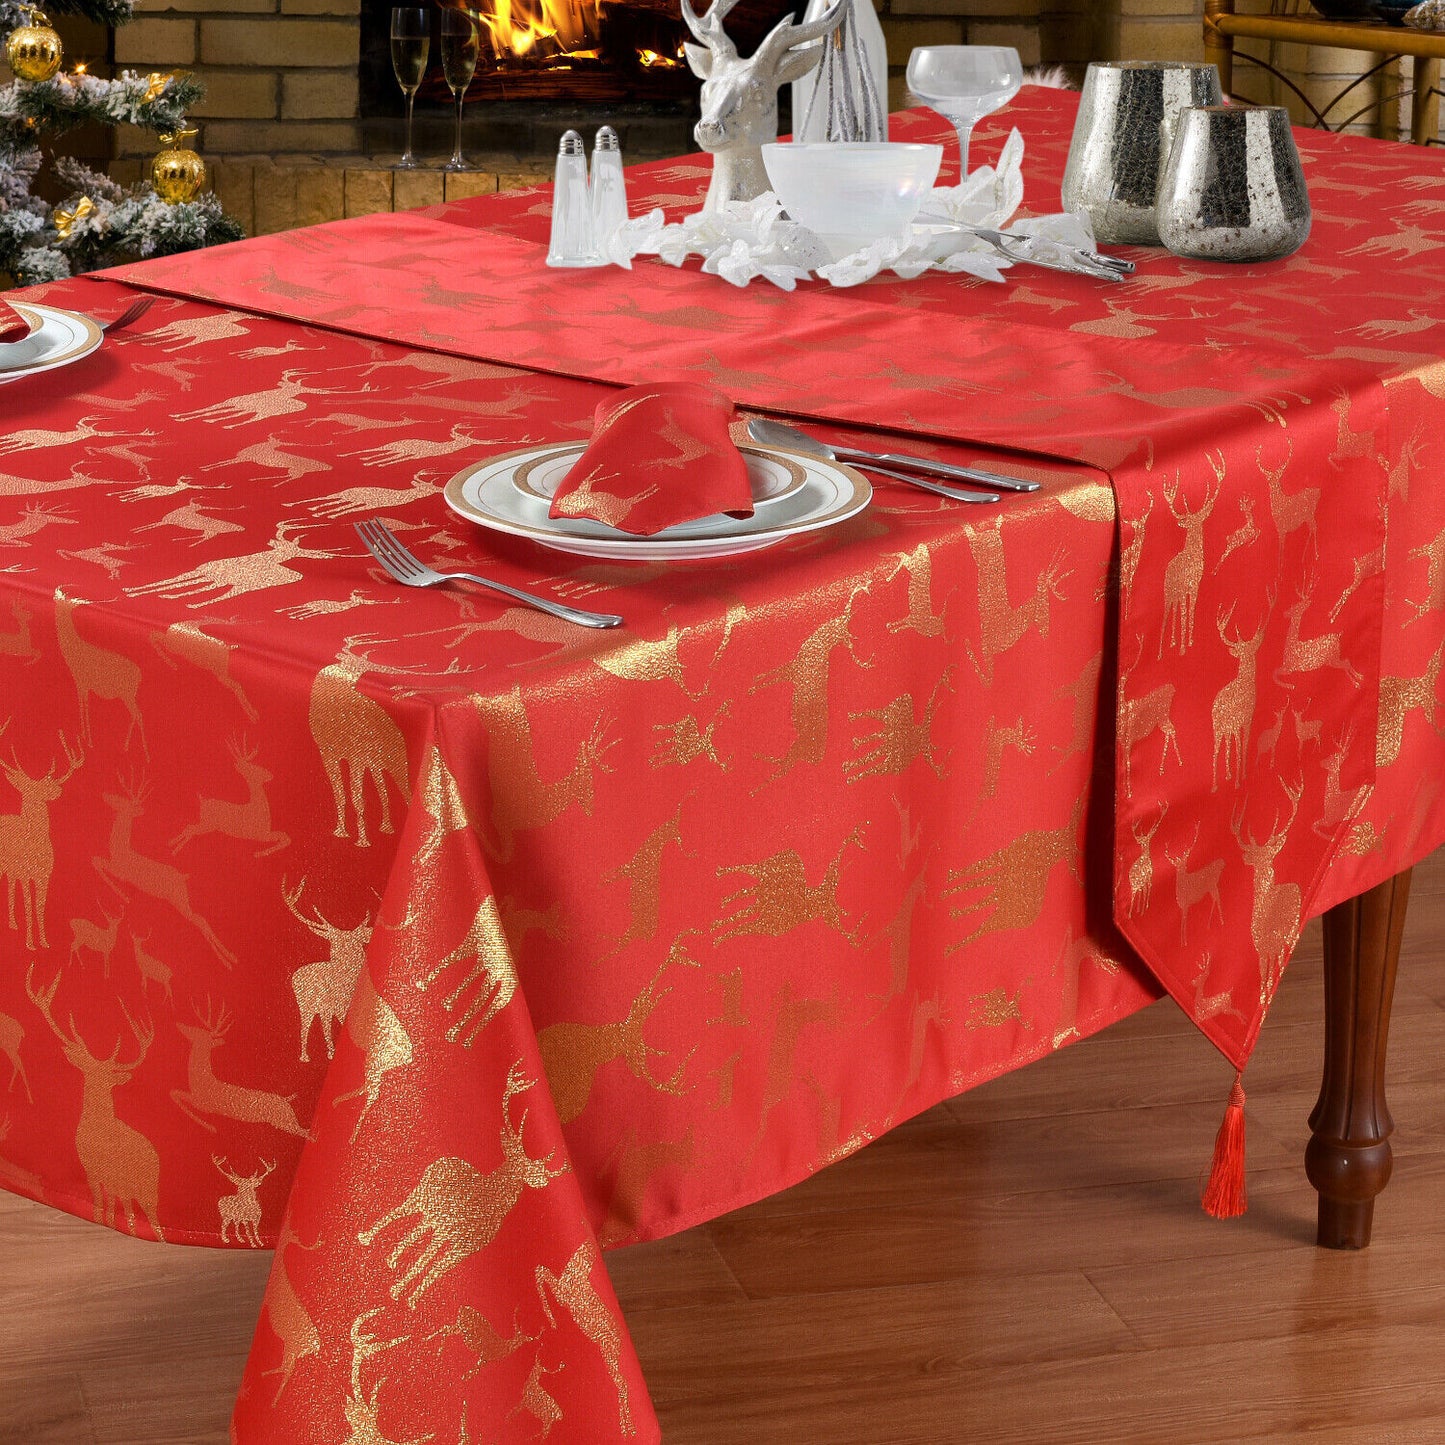 Large Stag Deer Red Gold 70" x 108" Oblong Tablecloth 8 - 10 Place Setting Festive Dining